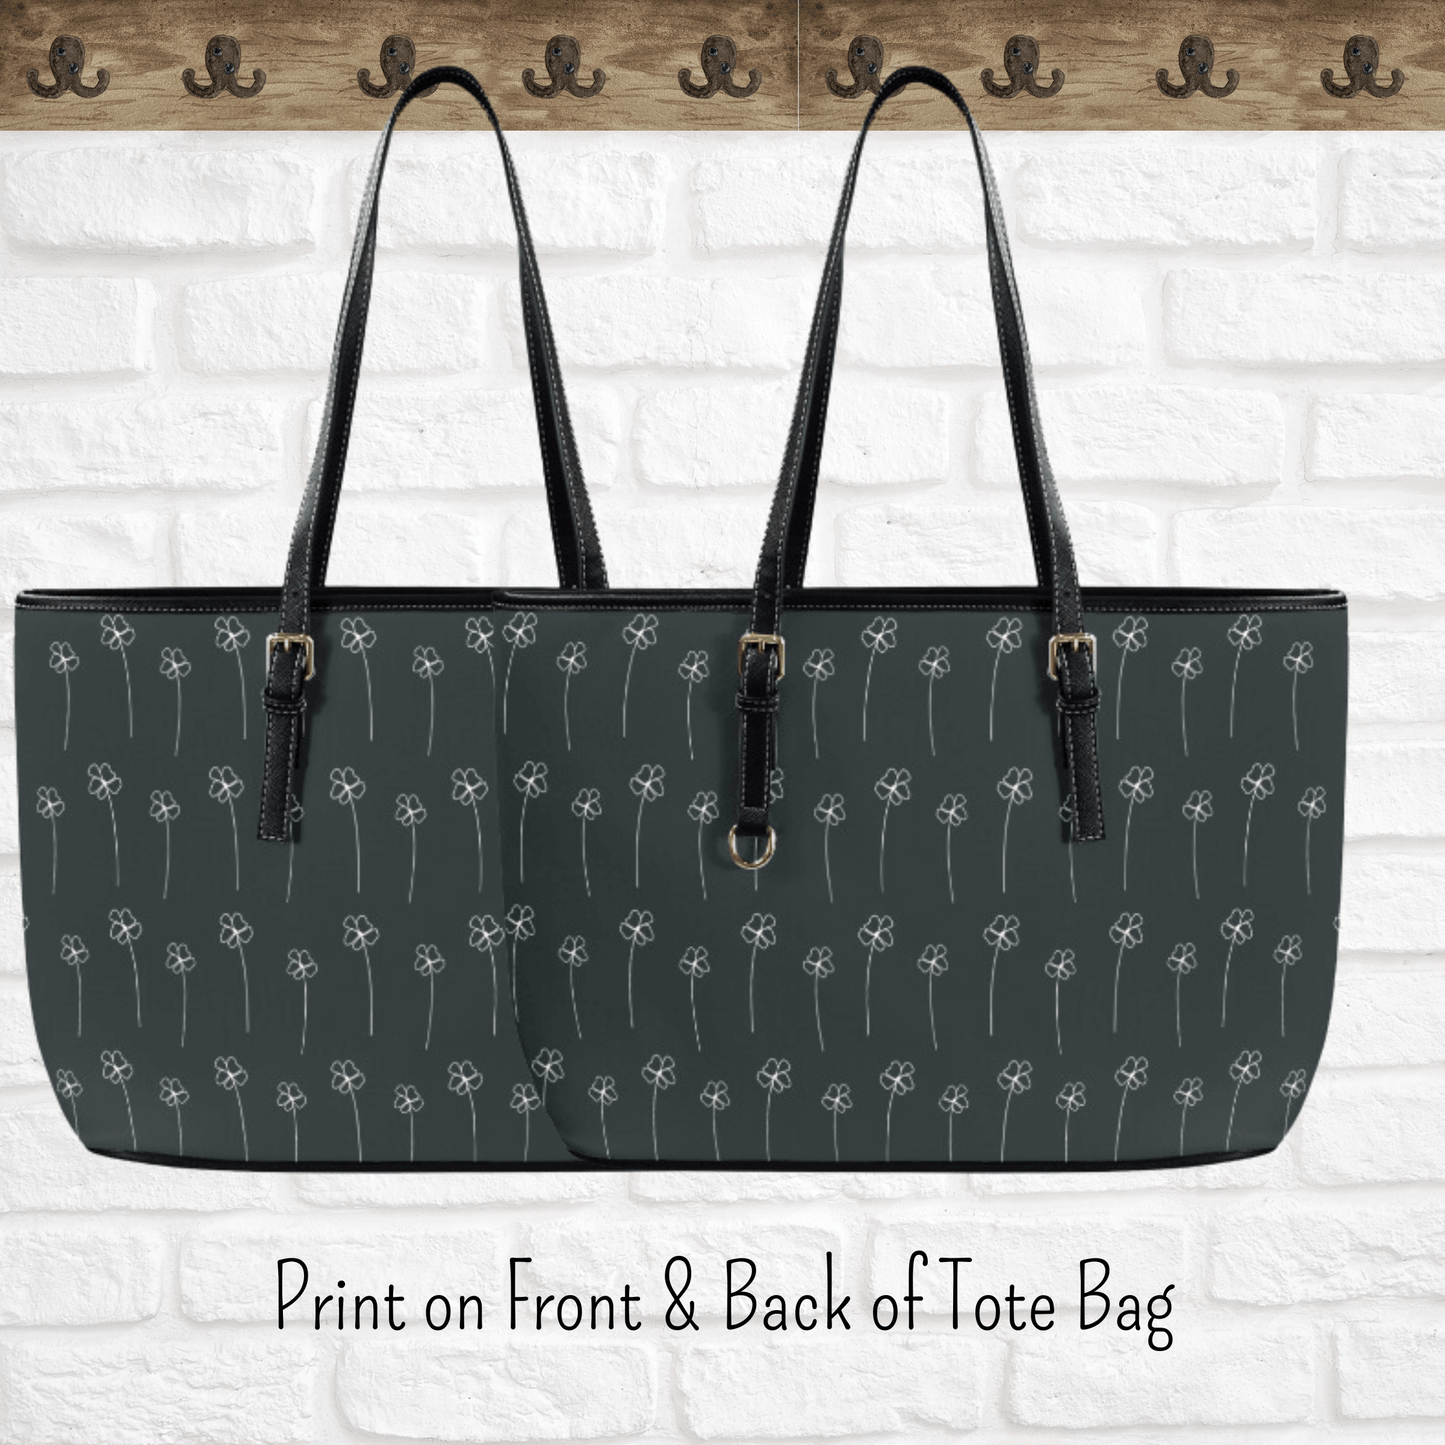 The front and back of our boho black tote bag has the same design